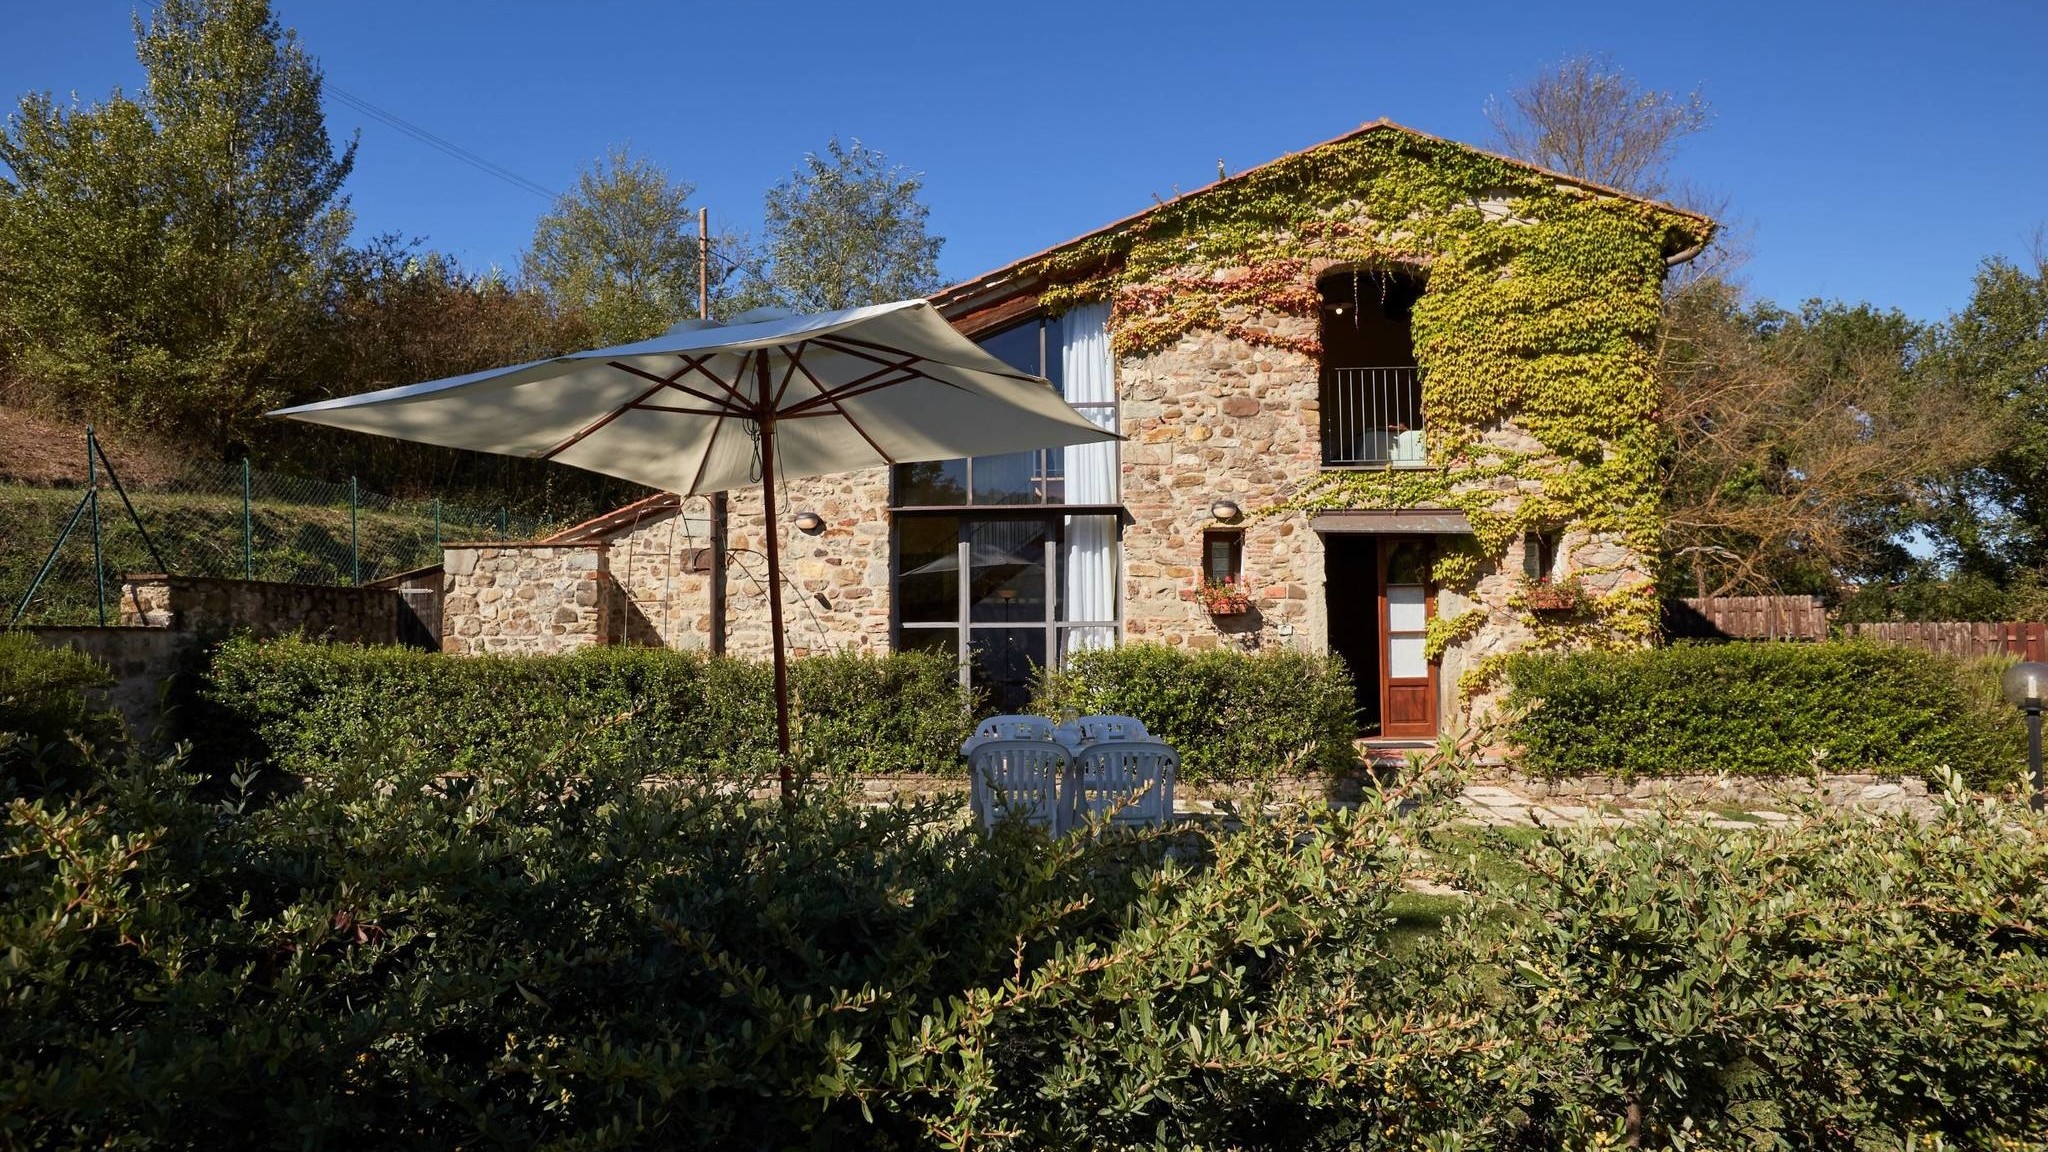 Stone House Baita - Arezzo - 2 bedrooms - Handpicked by our team